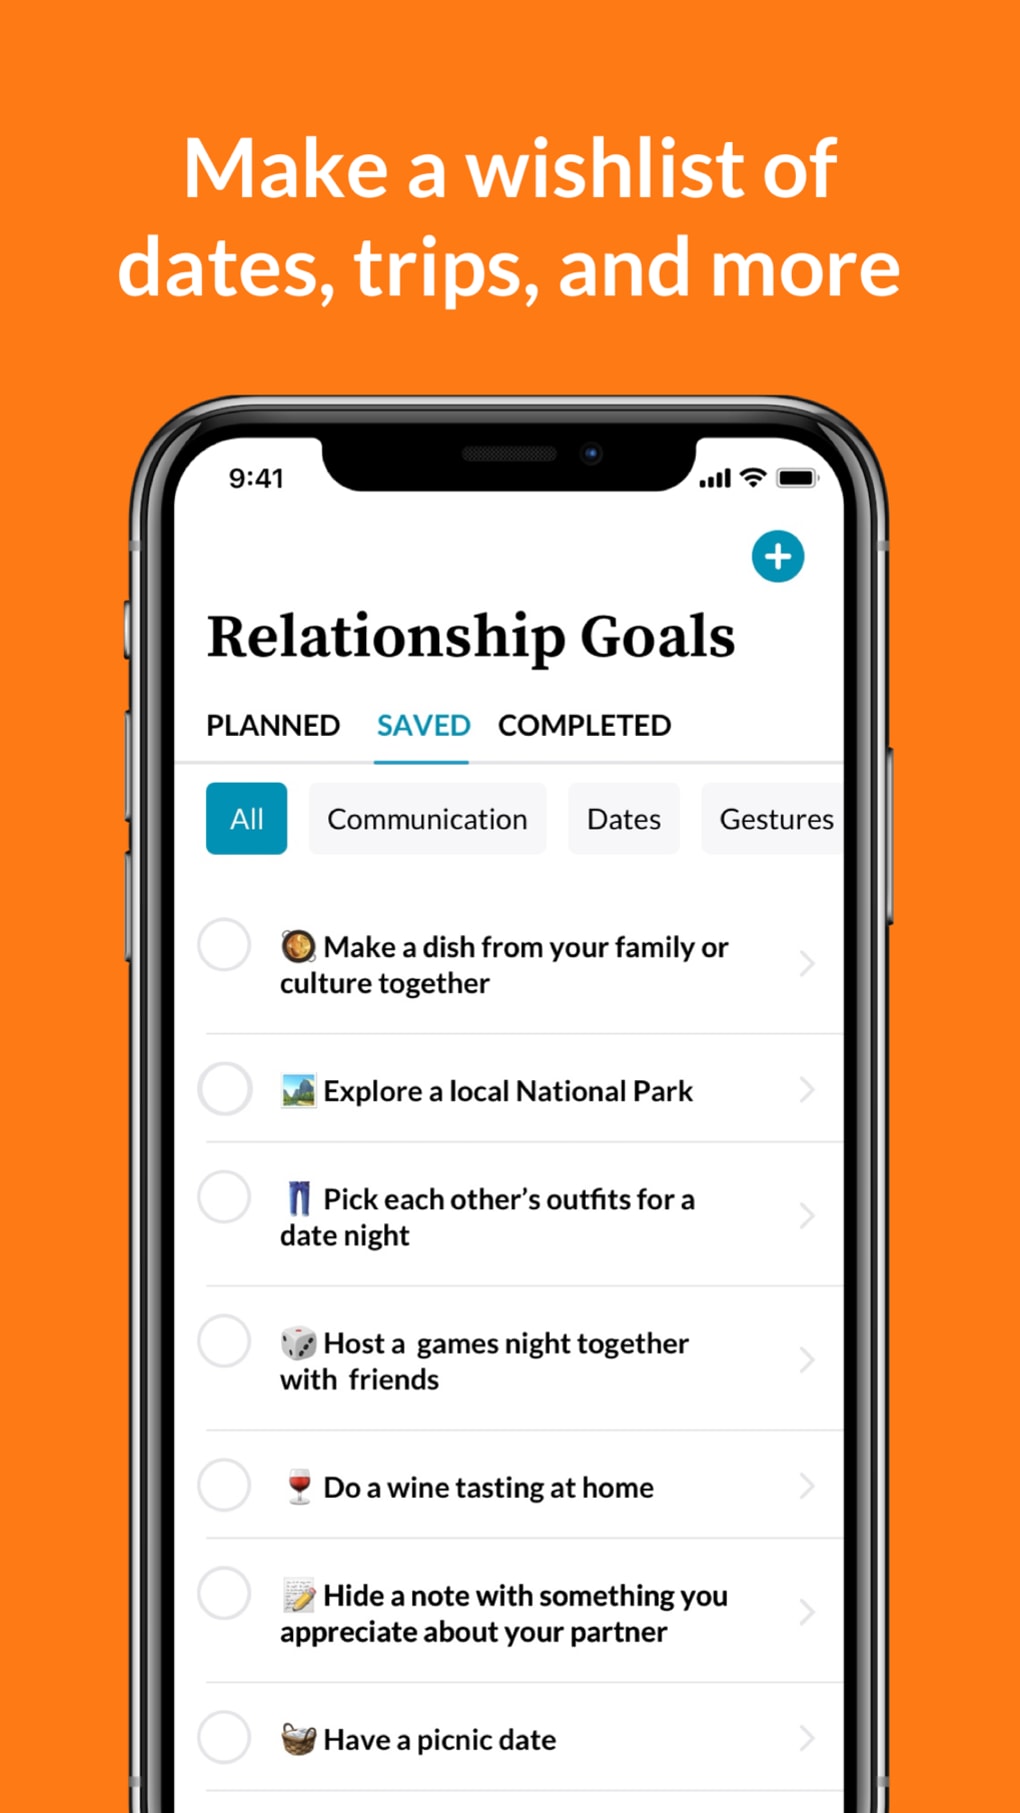 Lovewick: Relationship App For Couples